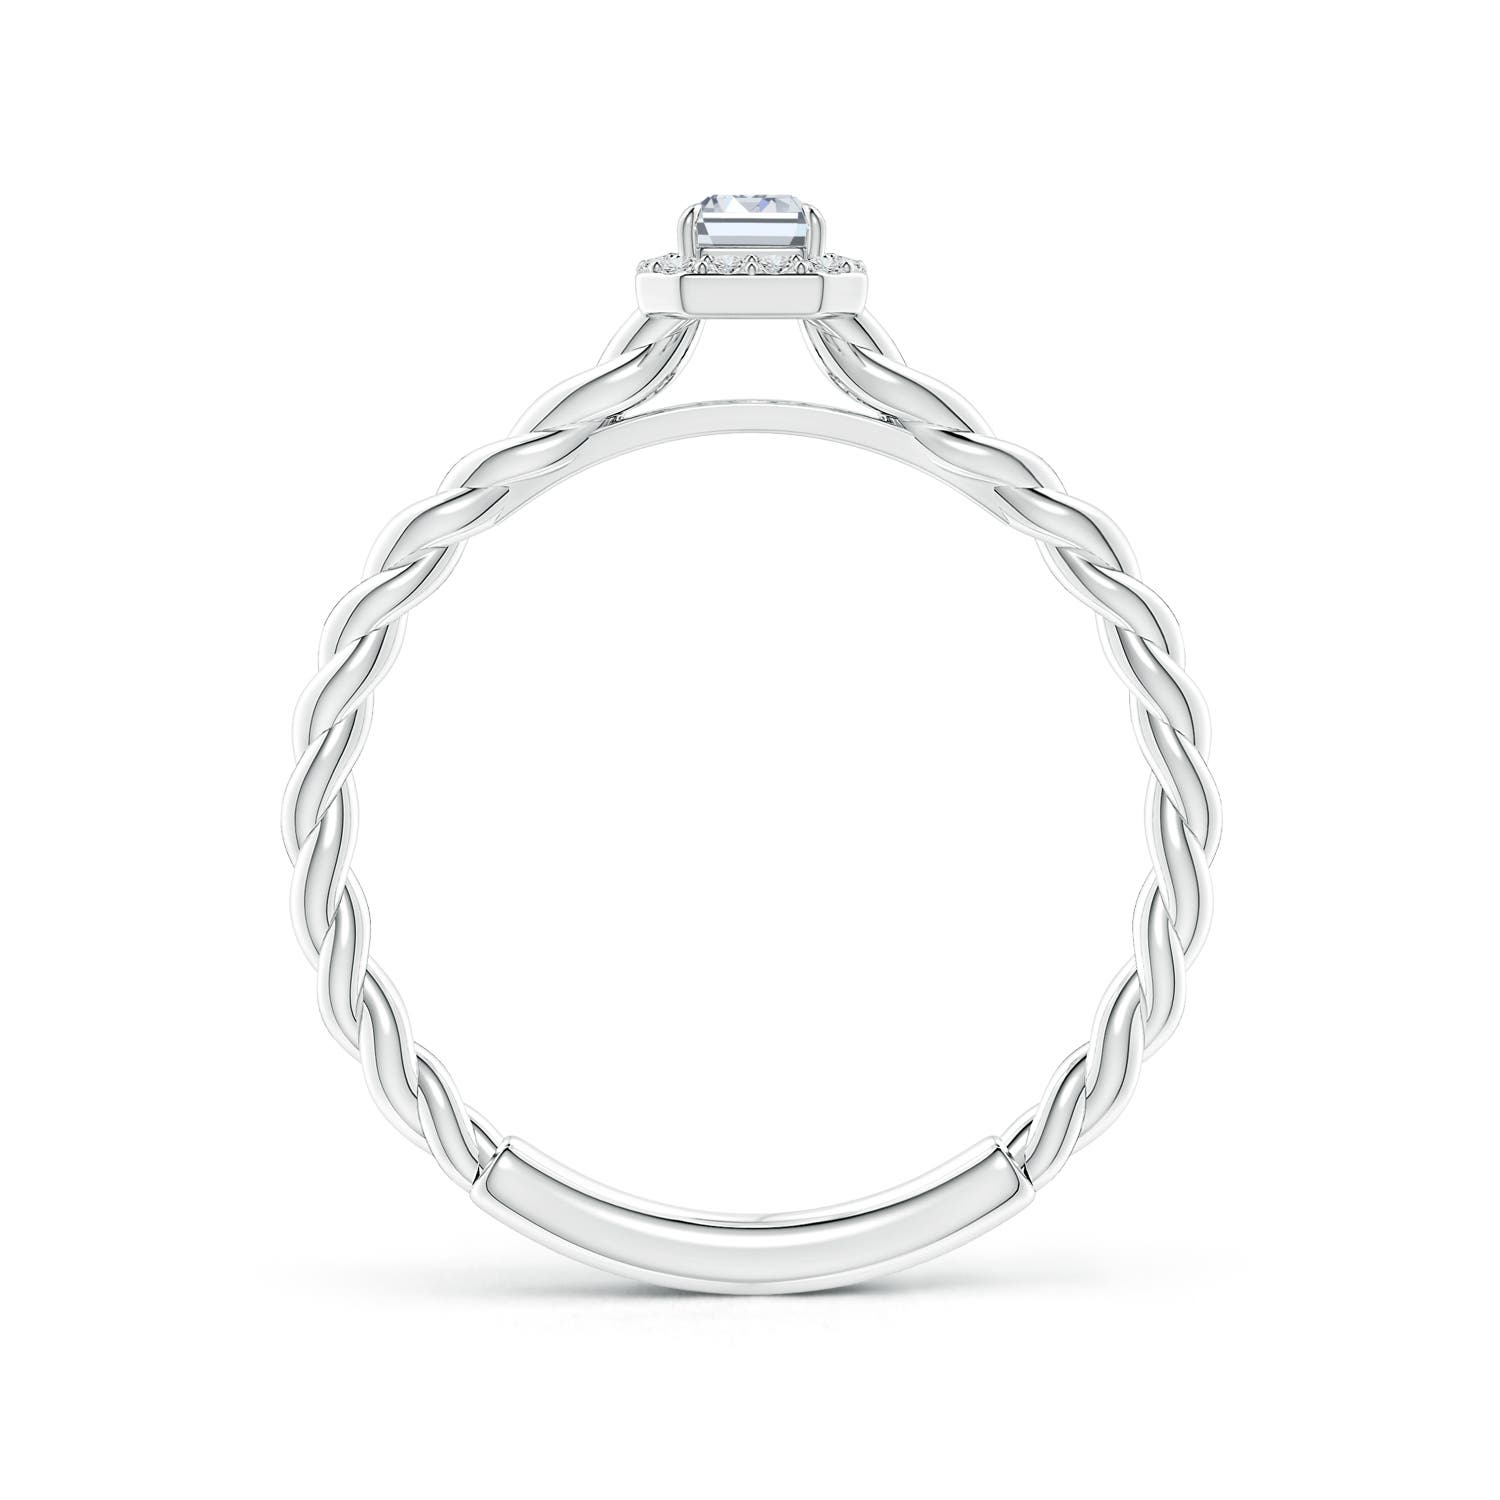 H, SI2 / 0.38 CT / 14 KT White Gold